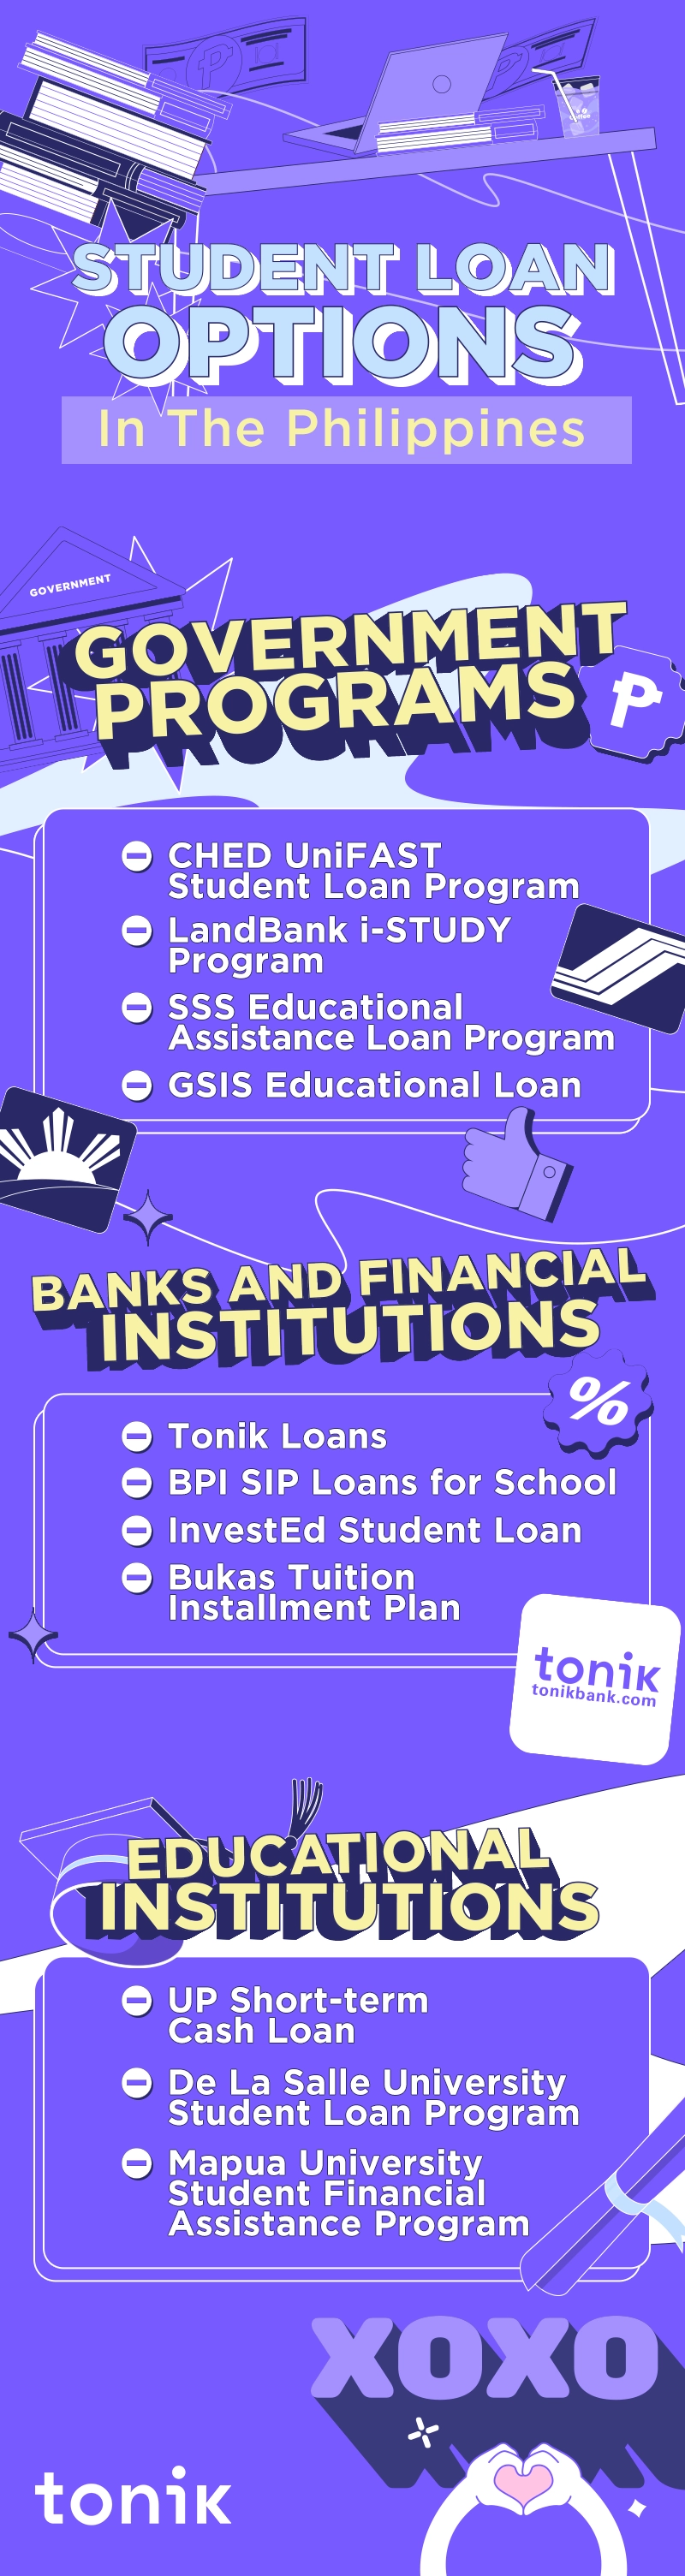 Infographic that shows student loan options in the Philippines